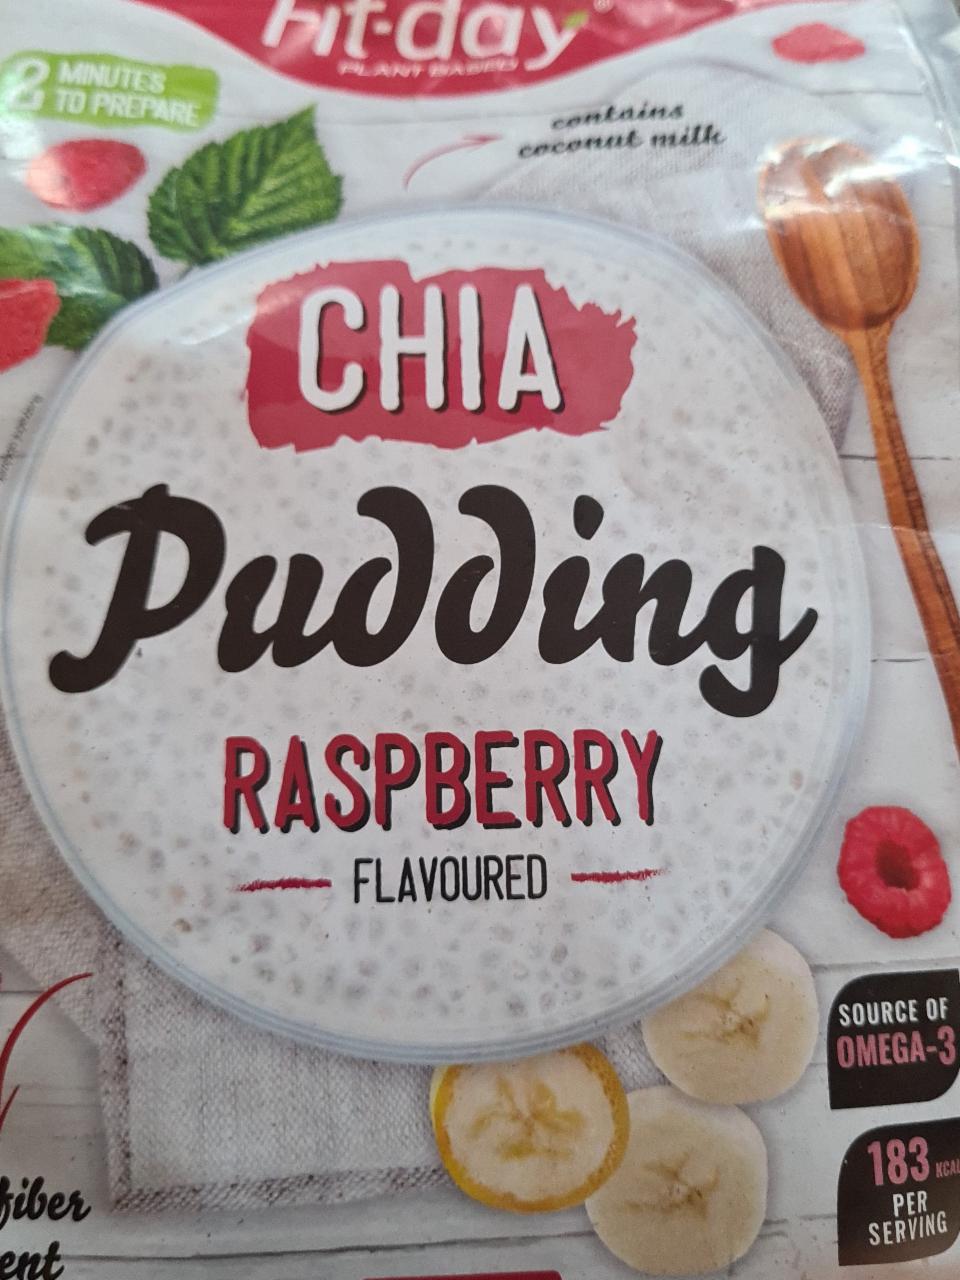 Fotografie - Chia pudding Raspberry Fit-day